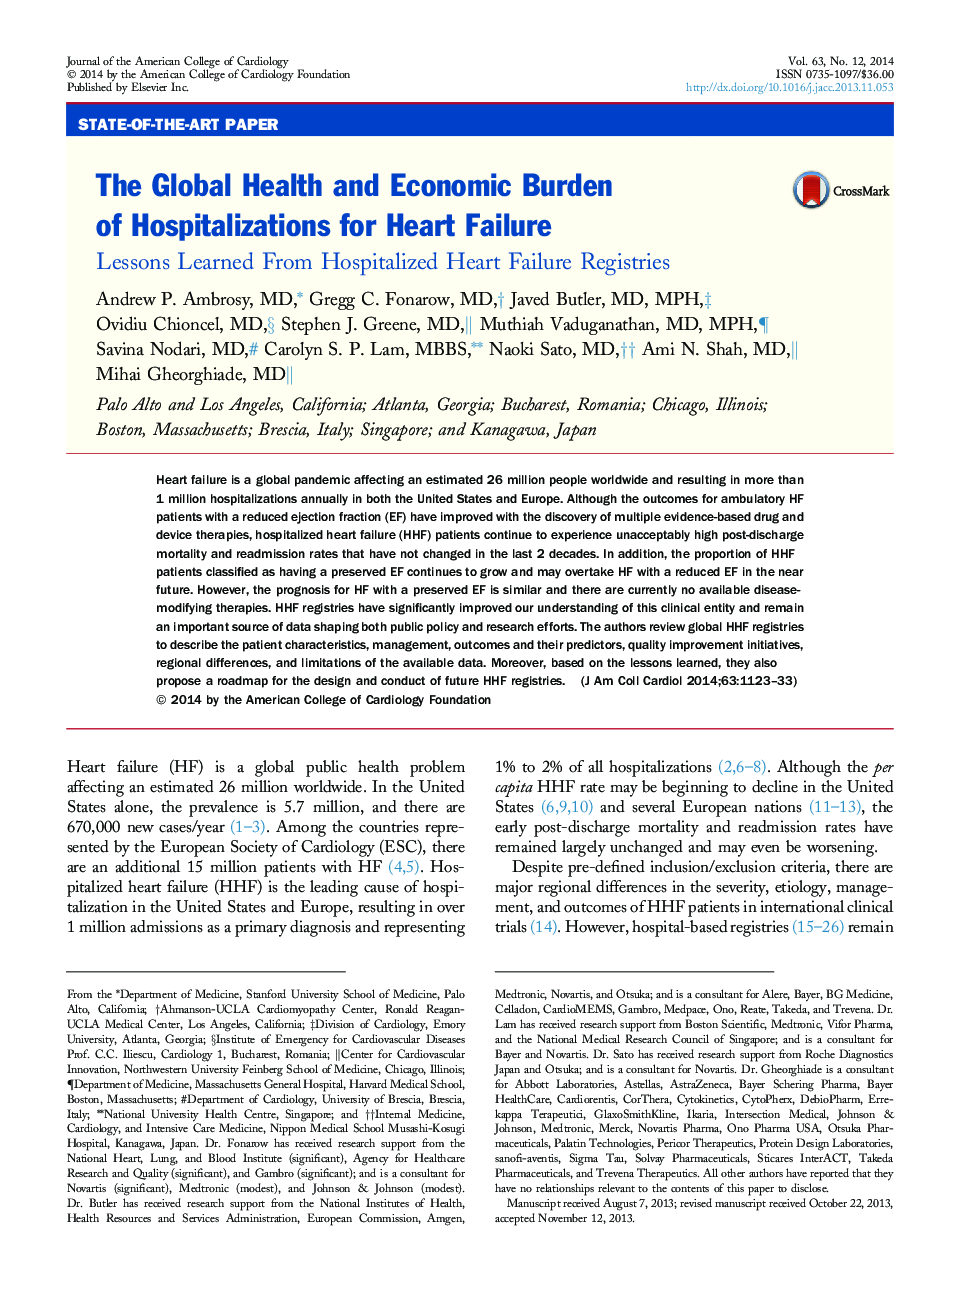 The Global Health and Economic Burden ofÂ Hospitalizations for Heart Failure: LessonsÂ Learned From Hospitalized Heart Failure Registries